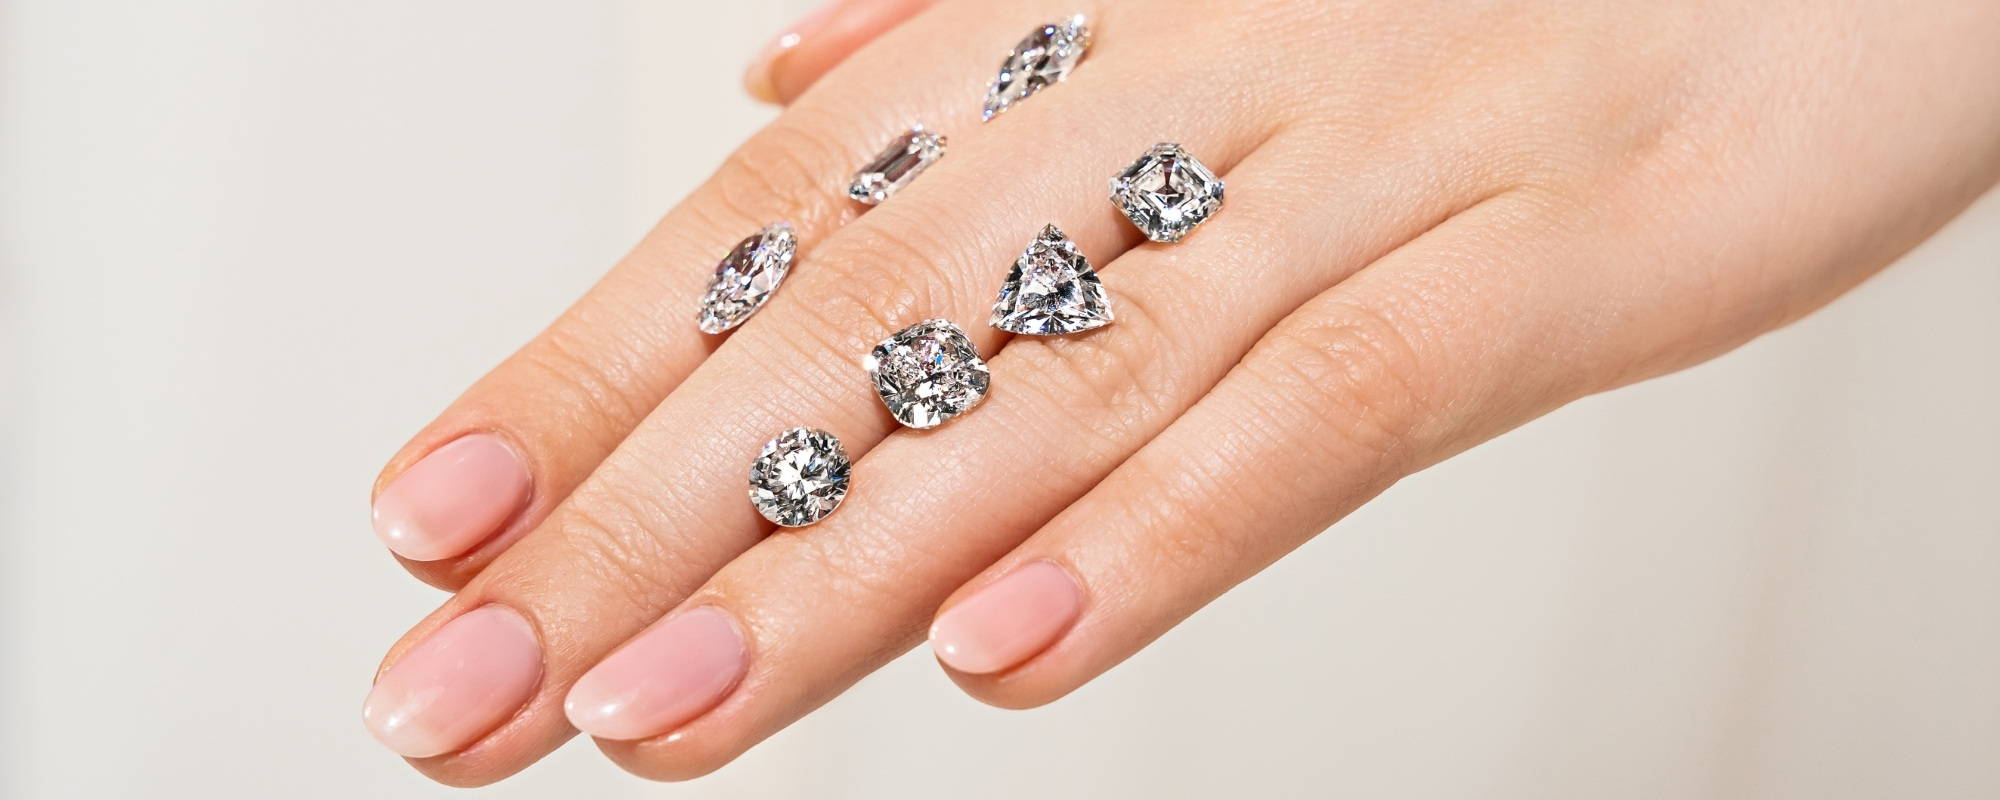 The Best Style Engagement Rings According to Diamond Shape